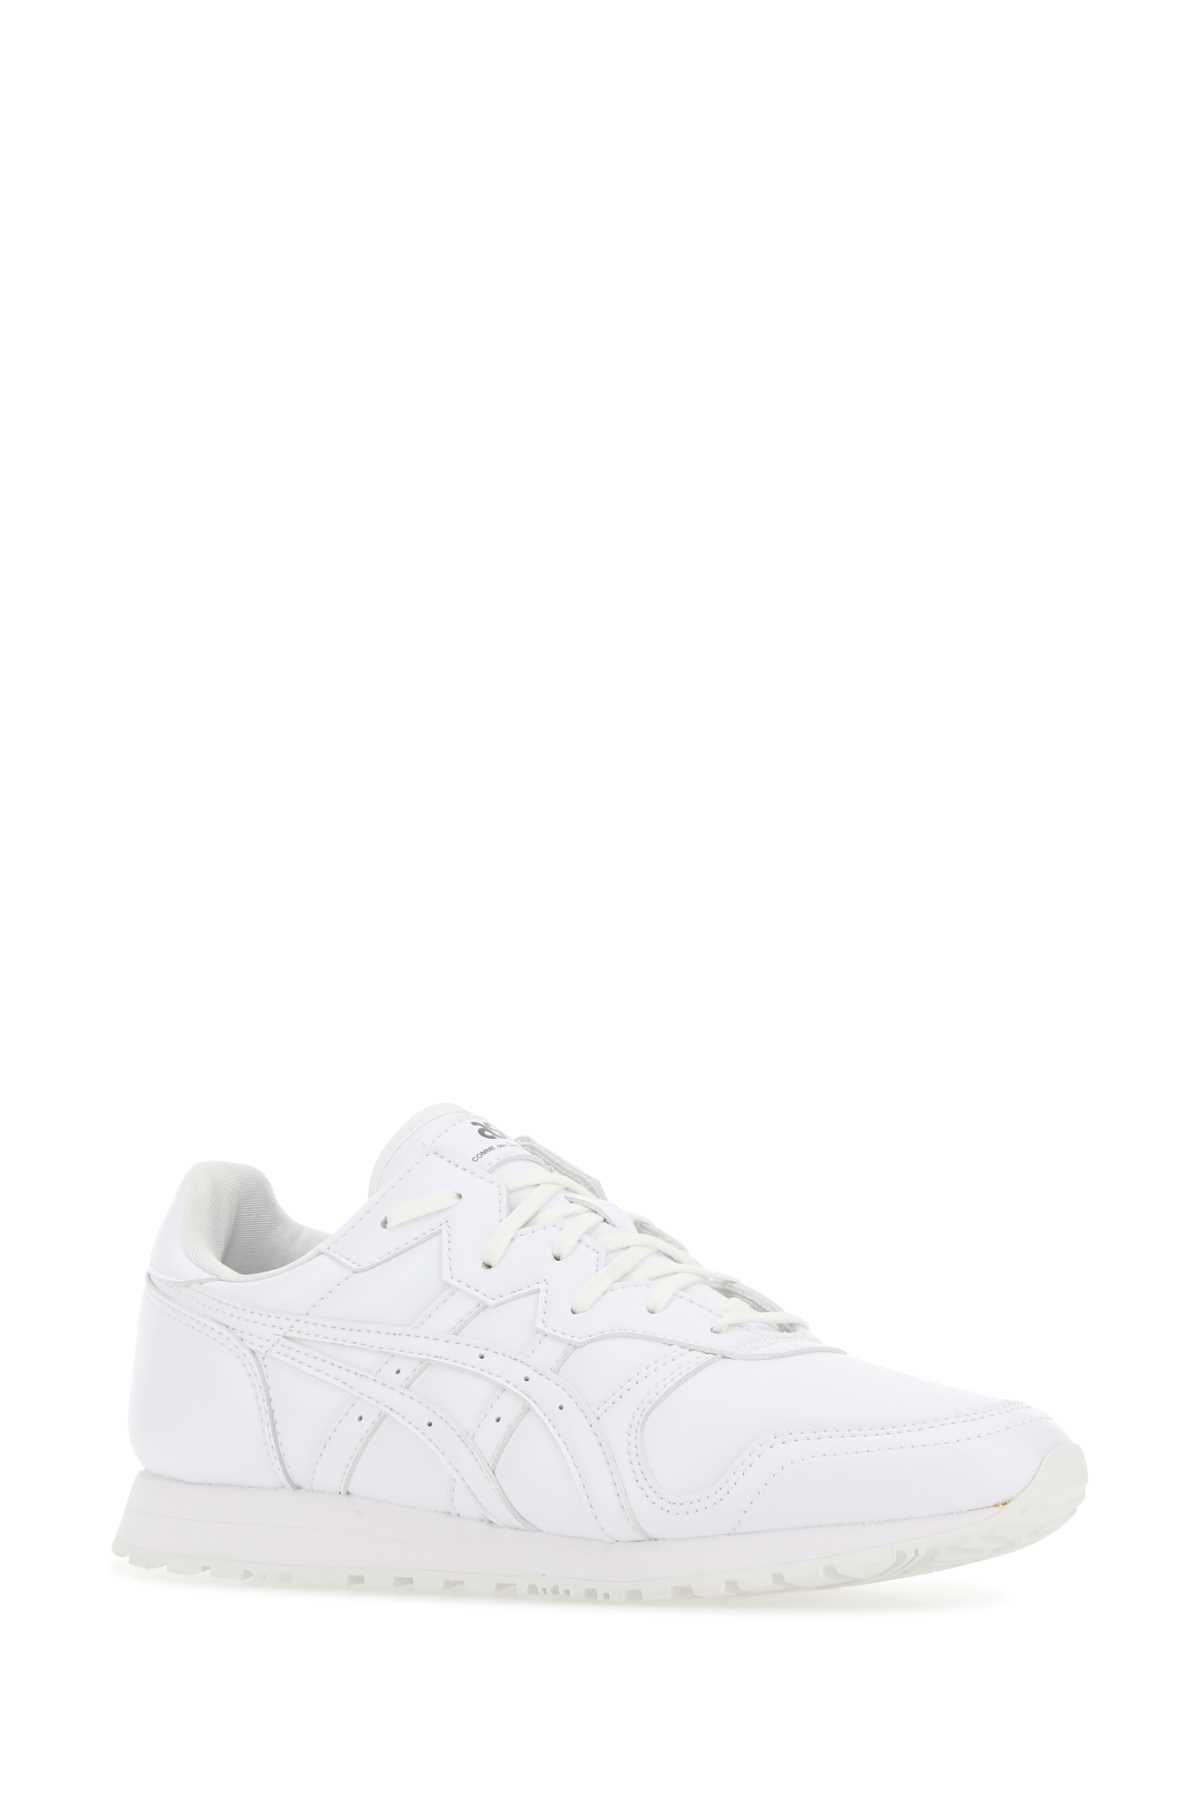 Comme Des Garçons Shirt White Synthetic Leather Oc Runner Trainers